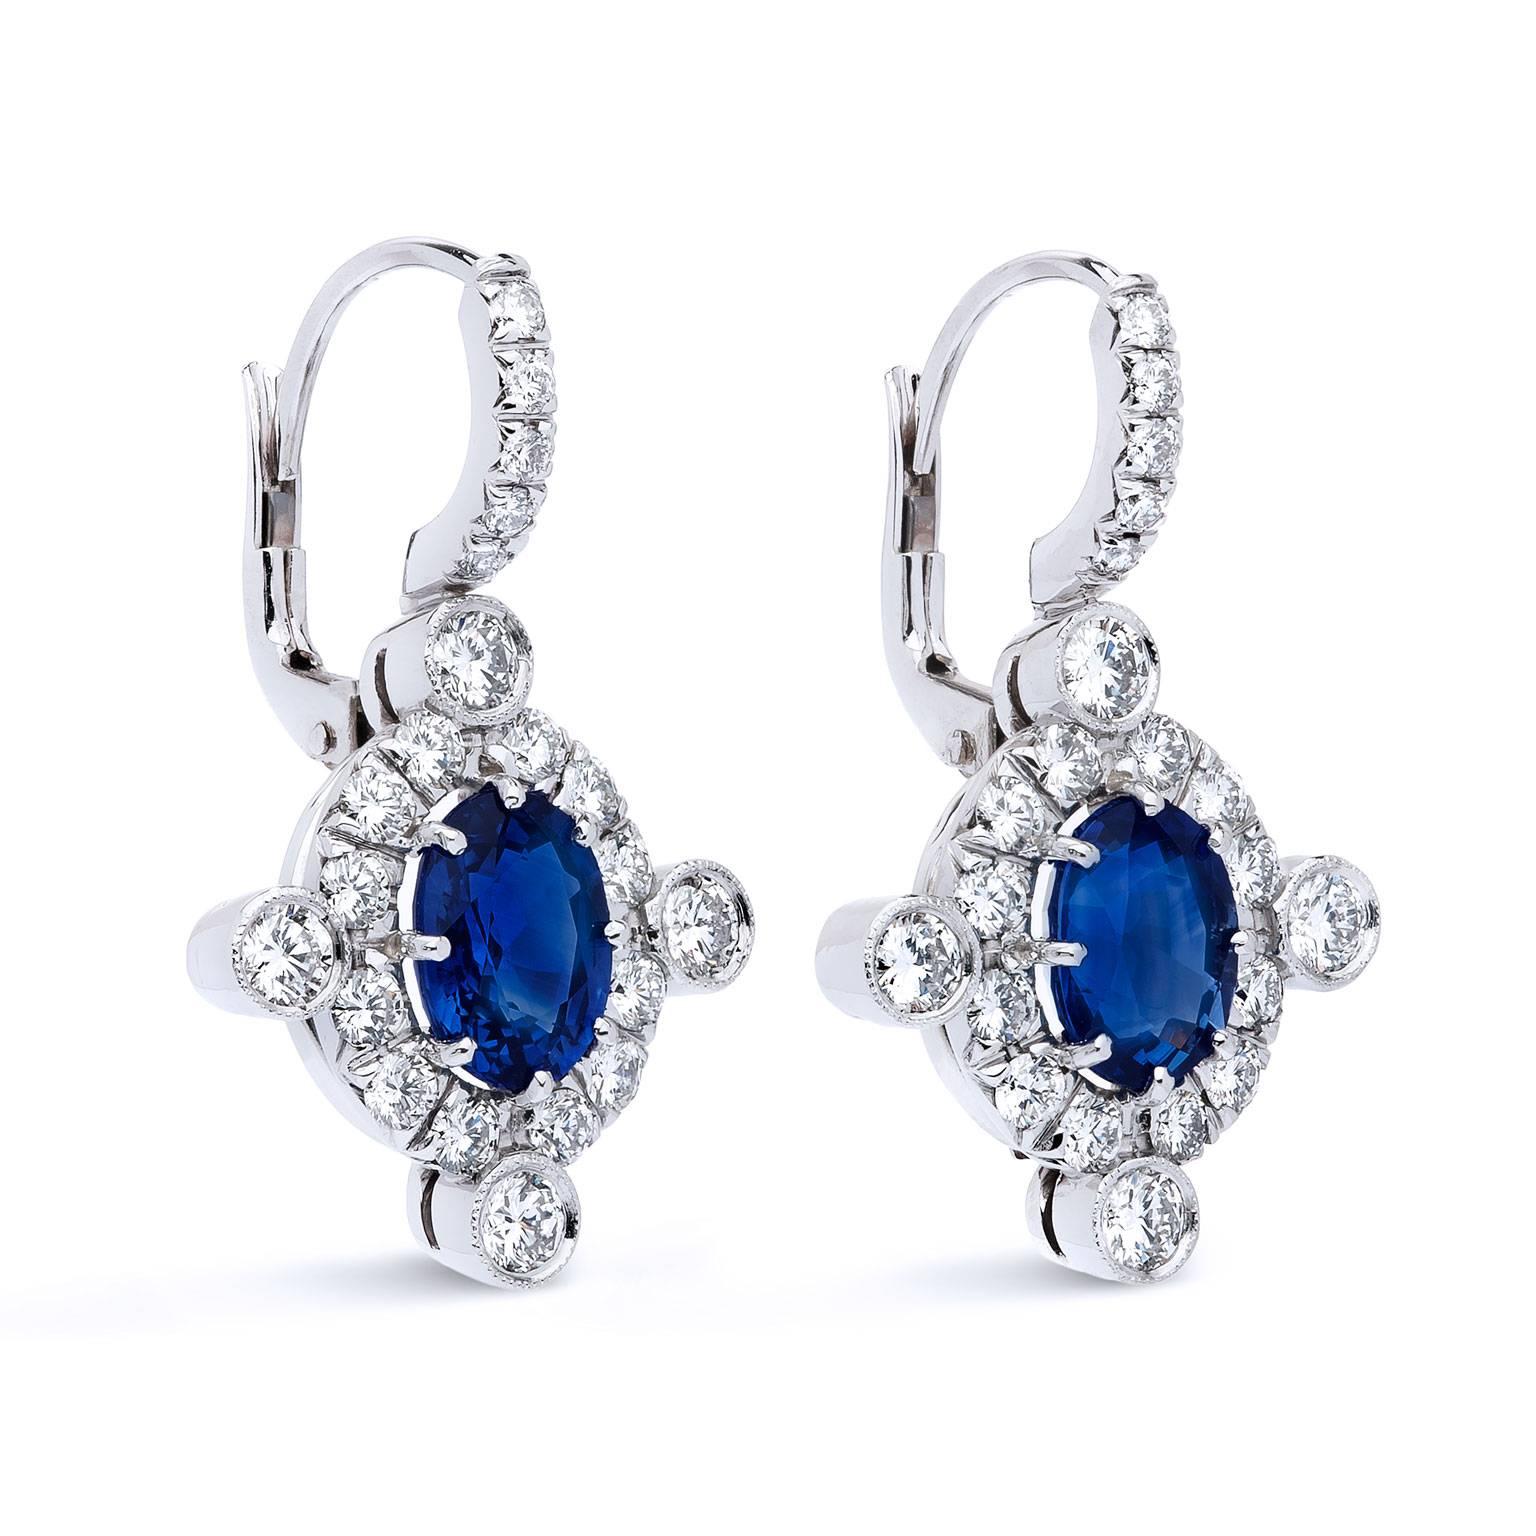 Oval 3.70 Carats Sapphires Diamond Gold Earrings

Eight 18 karat white gold prongs pin oval shaped sapphire gemstones weighing 3.70 carats in this lovely set of hand-made earrings. F/G VS diamonds create a pave perimeter around the oval sapphires,